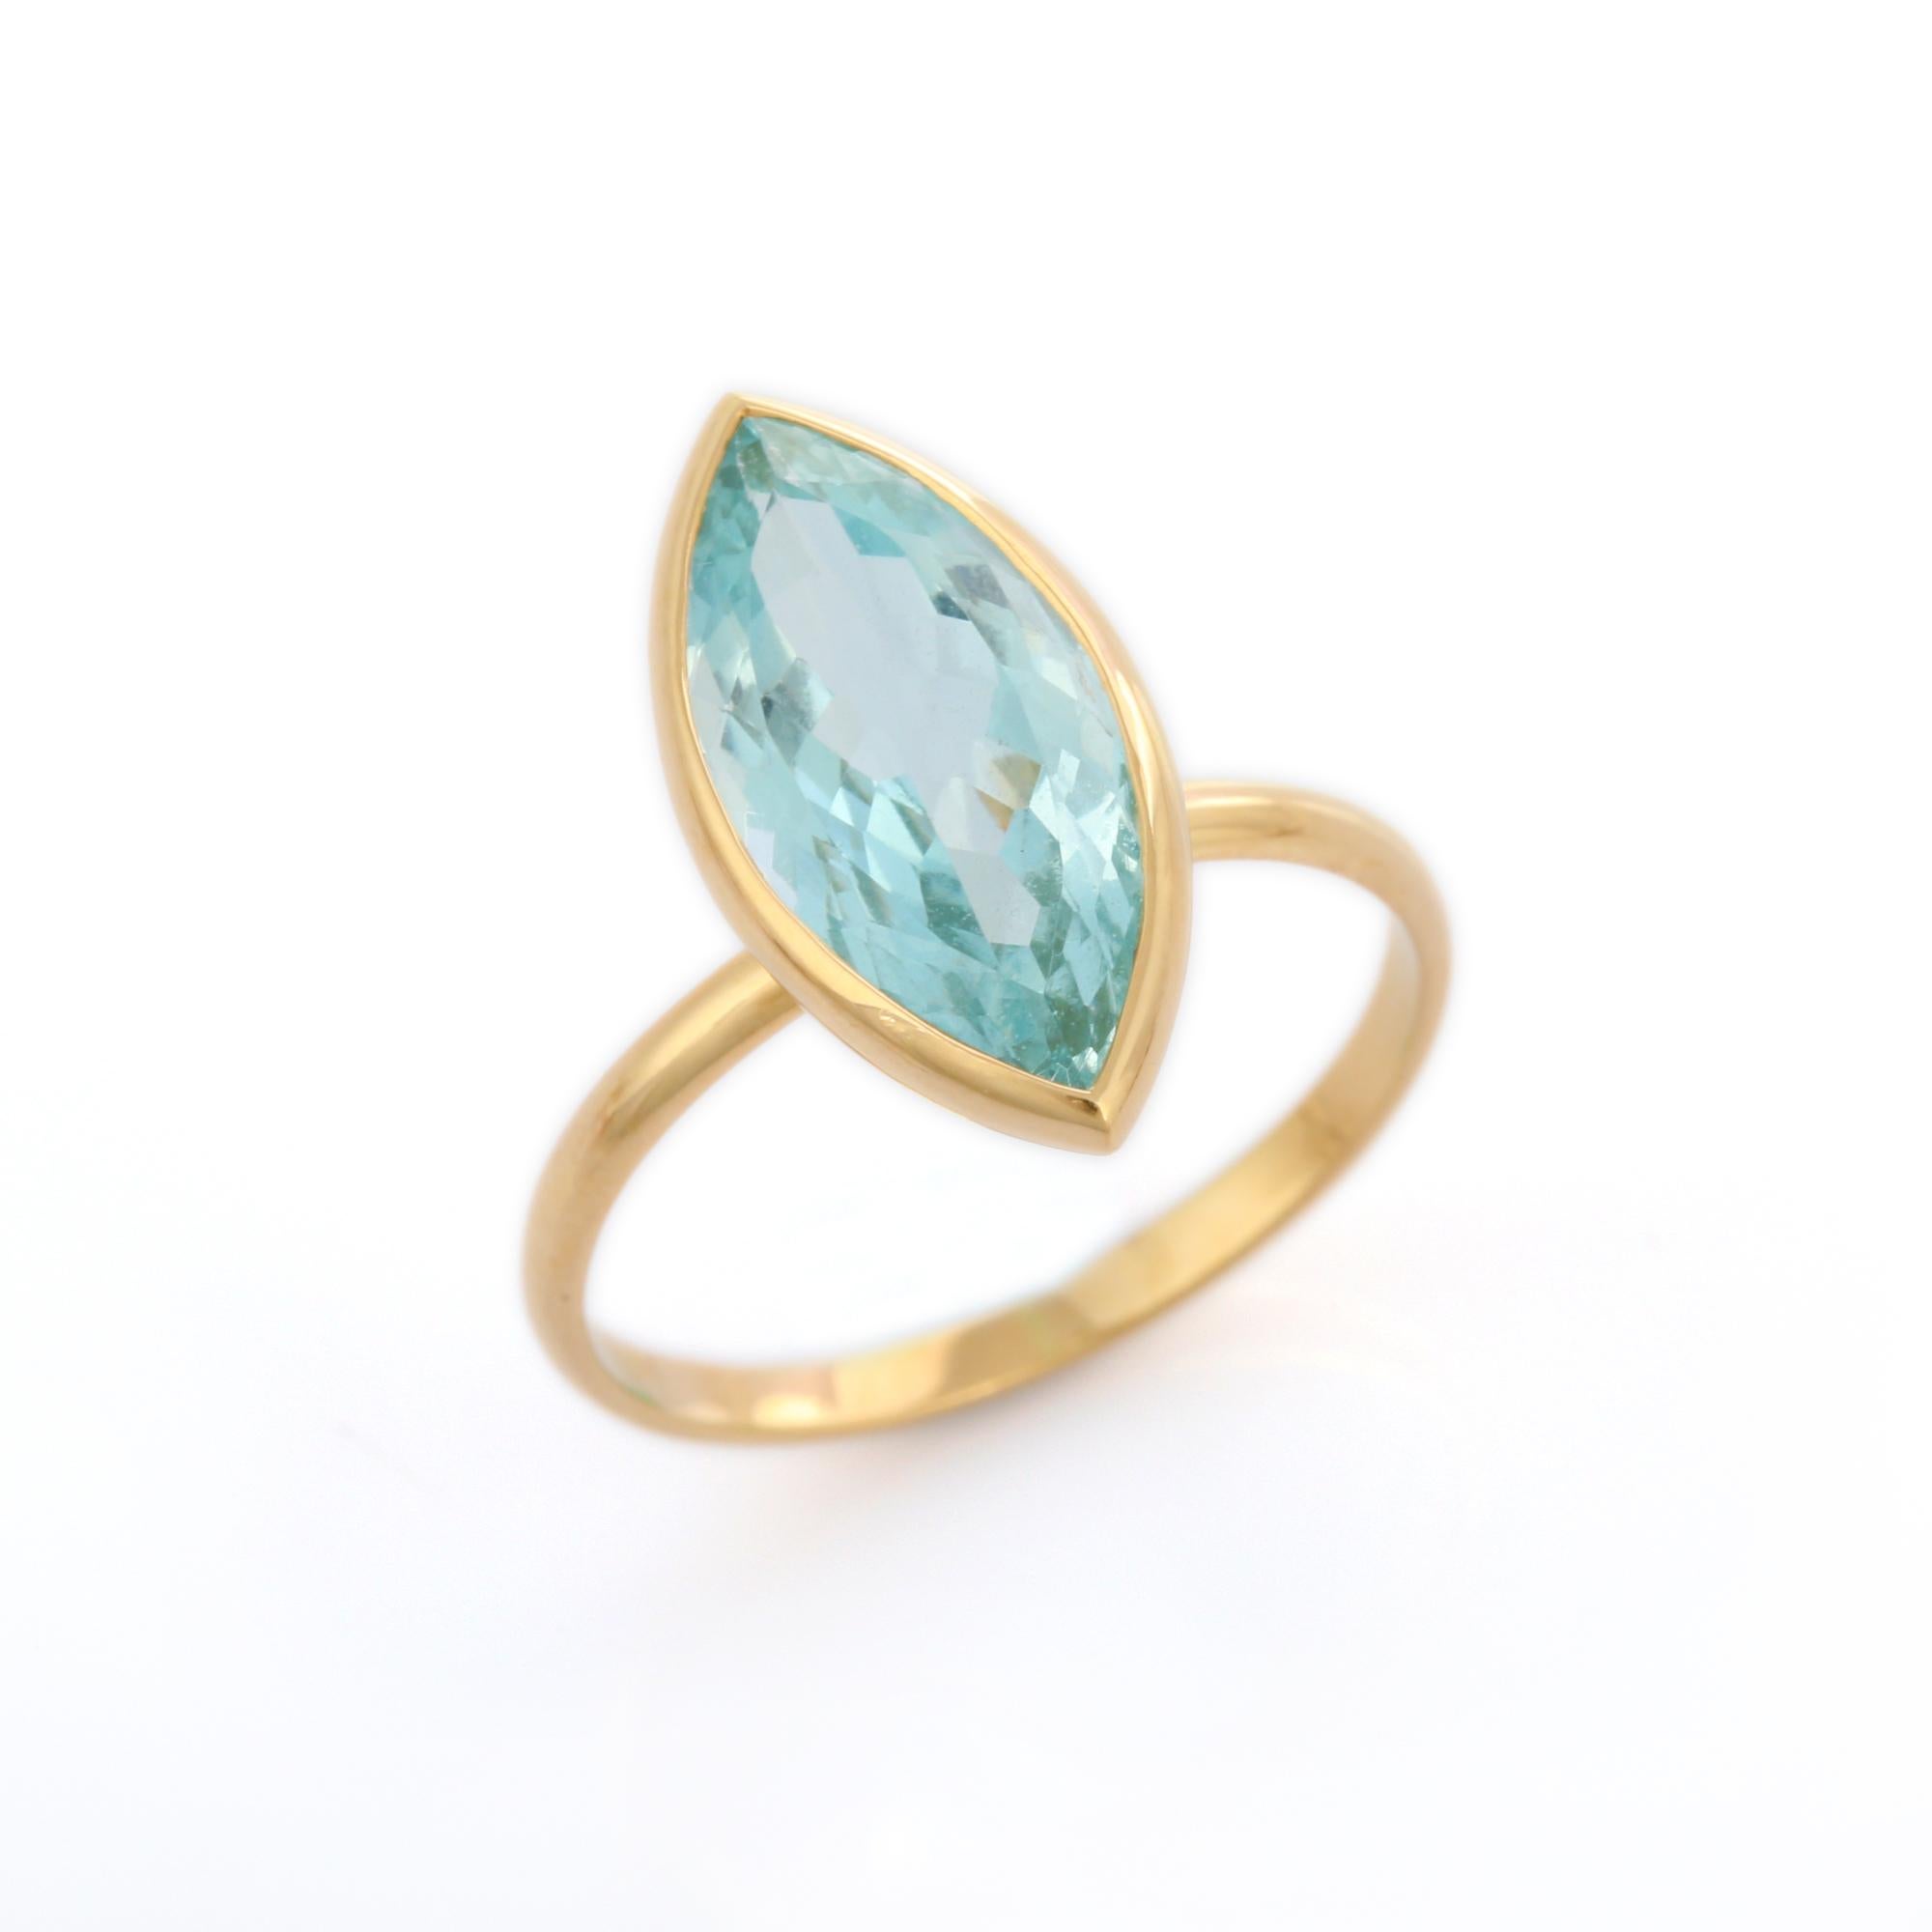 For Sale:  Marquise Cut Aquamarine Cocktail Ring in 18K Yellow Gold  10